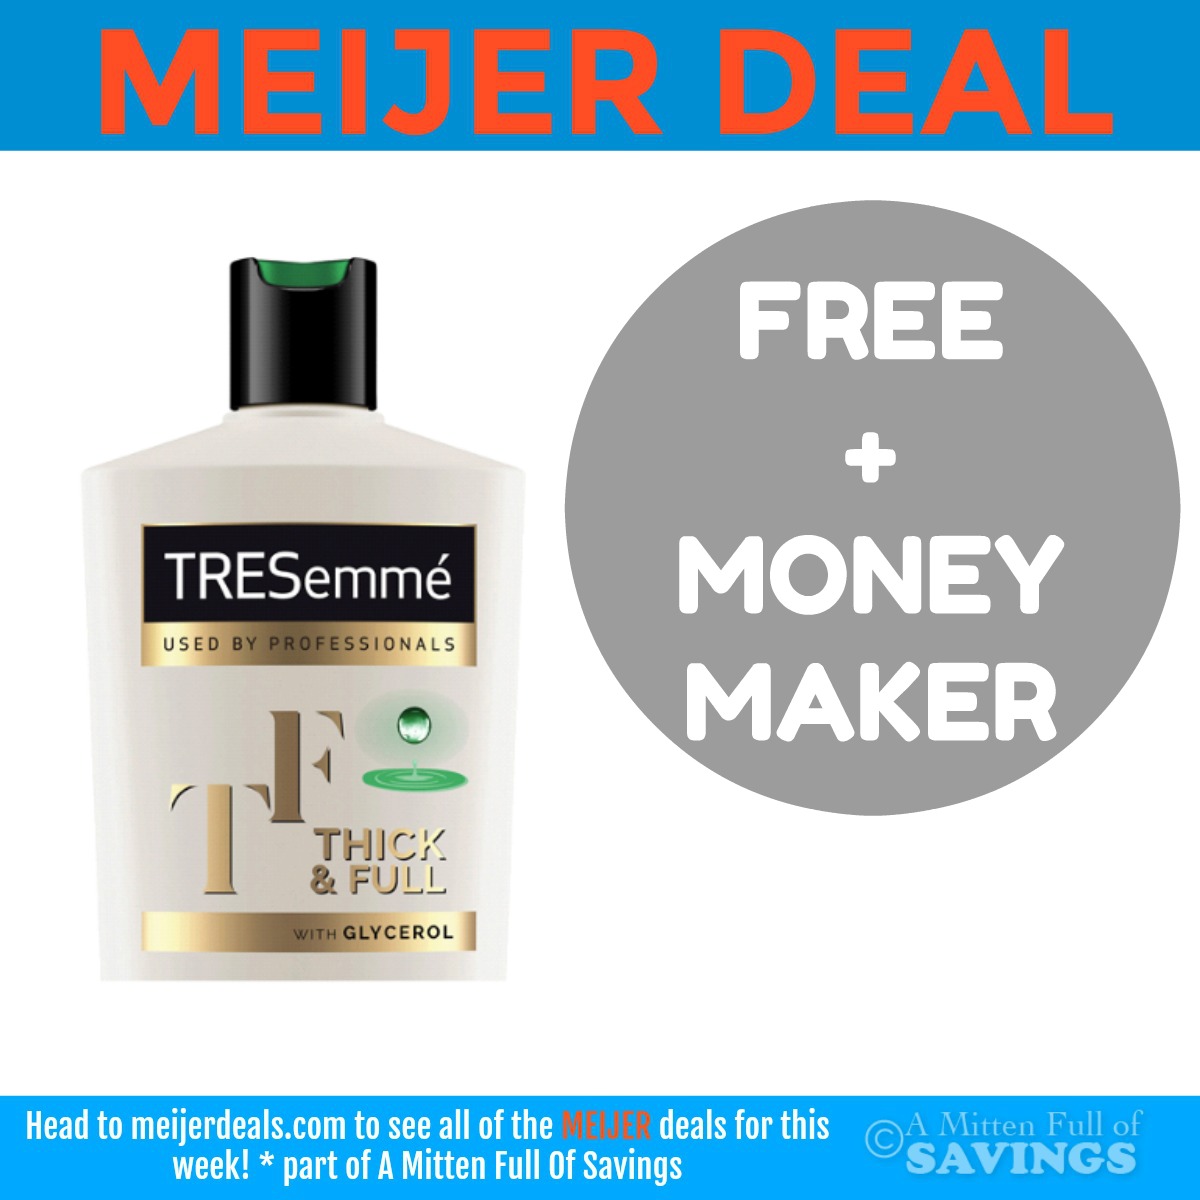 FREE TRESEMME AT MEIJER